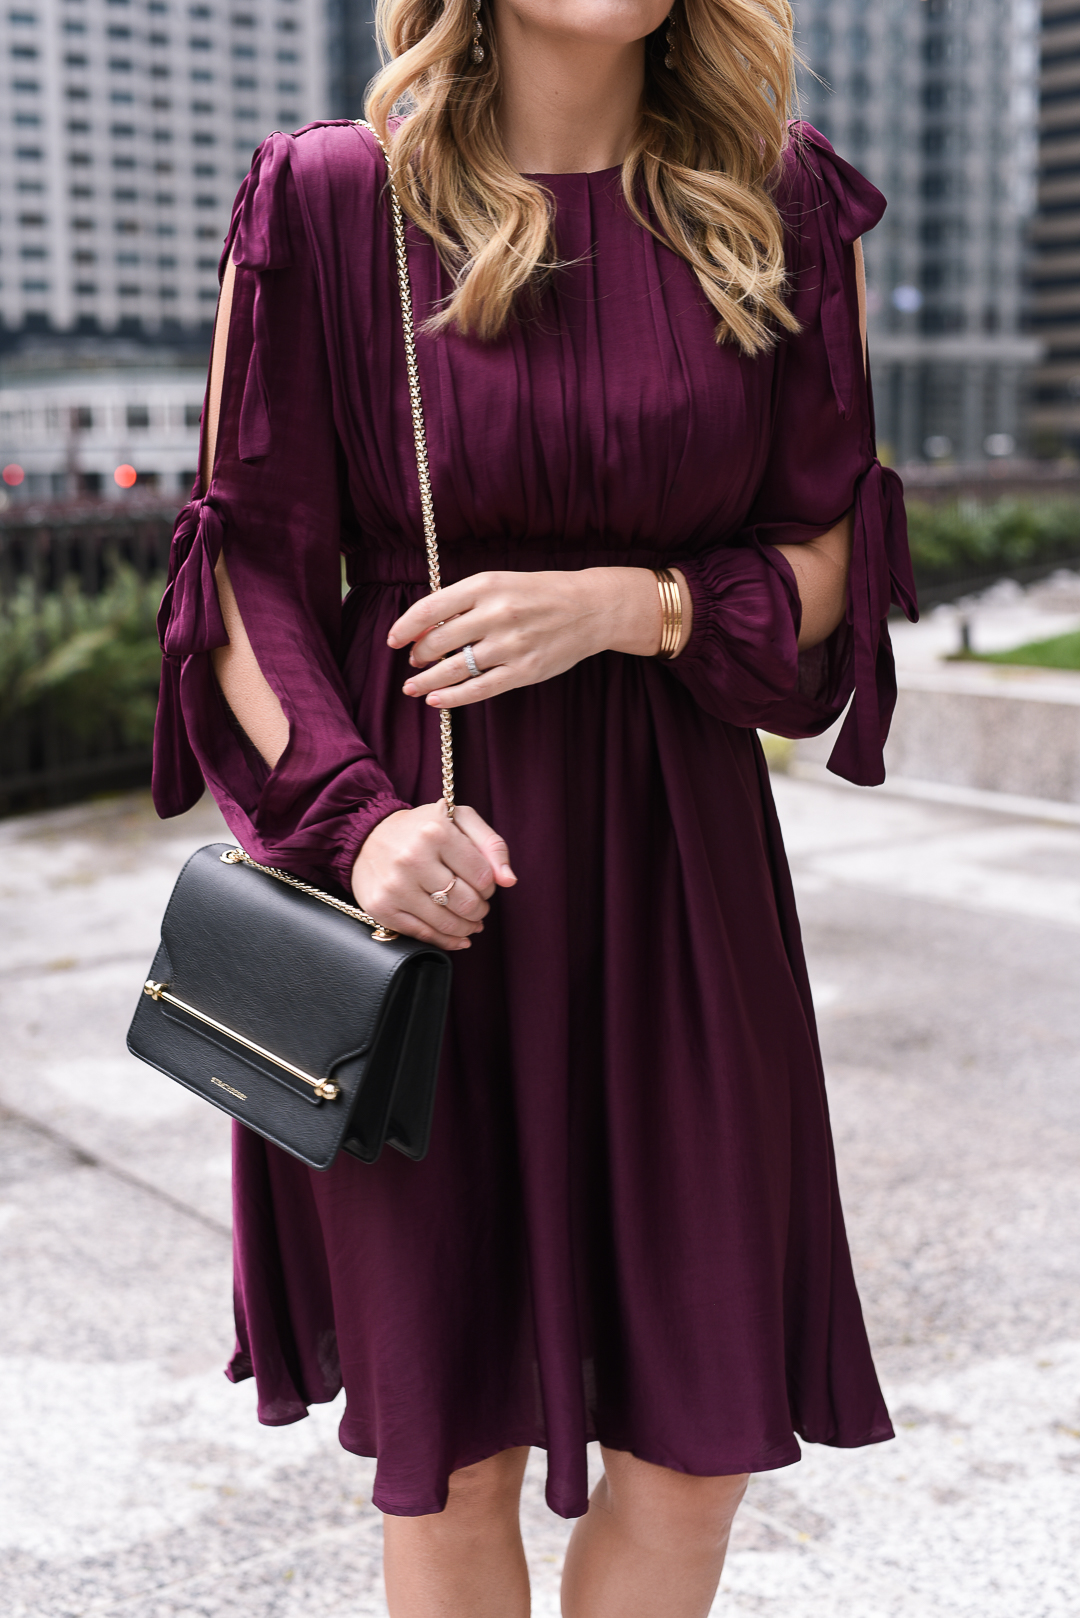 black leather strathberry bag - Burgundy Holiday Dress by Chicago fashion blogger Visions of Vogue